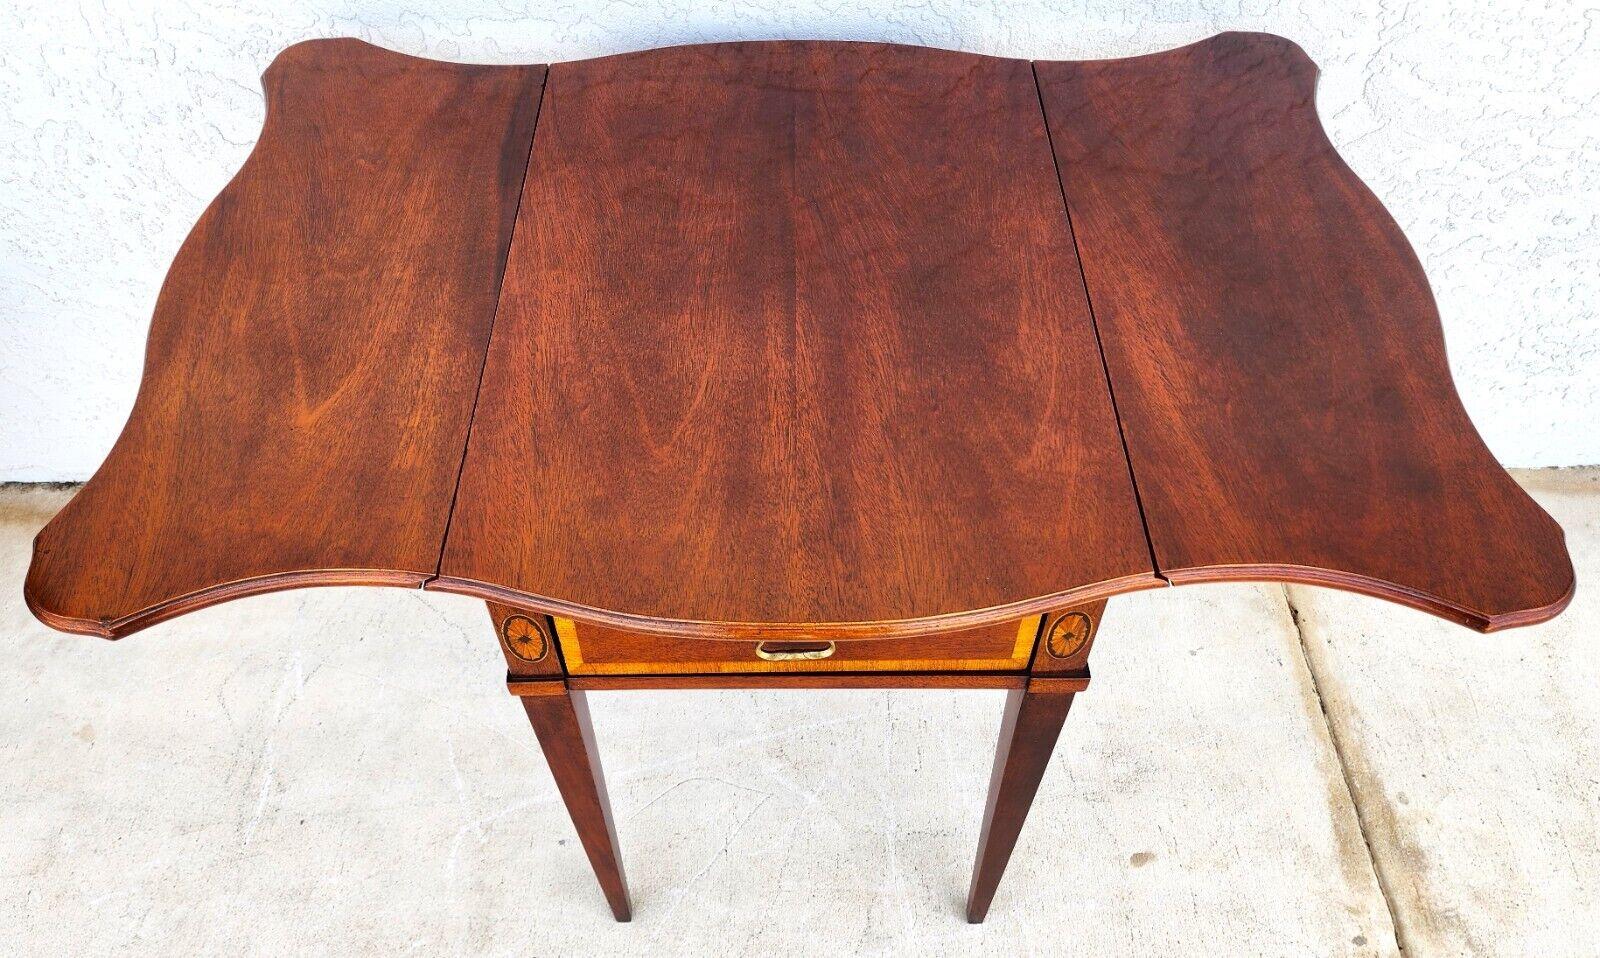 For FULL item description click on CONTINUE READING at the bottom of this page.

Offering One Of Our Recent Palm Beach Estate Fine Furniture Acquisitions Of A 
Pembroke Drop Leaf Side Table Federal Style Mahogany Inlaid by